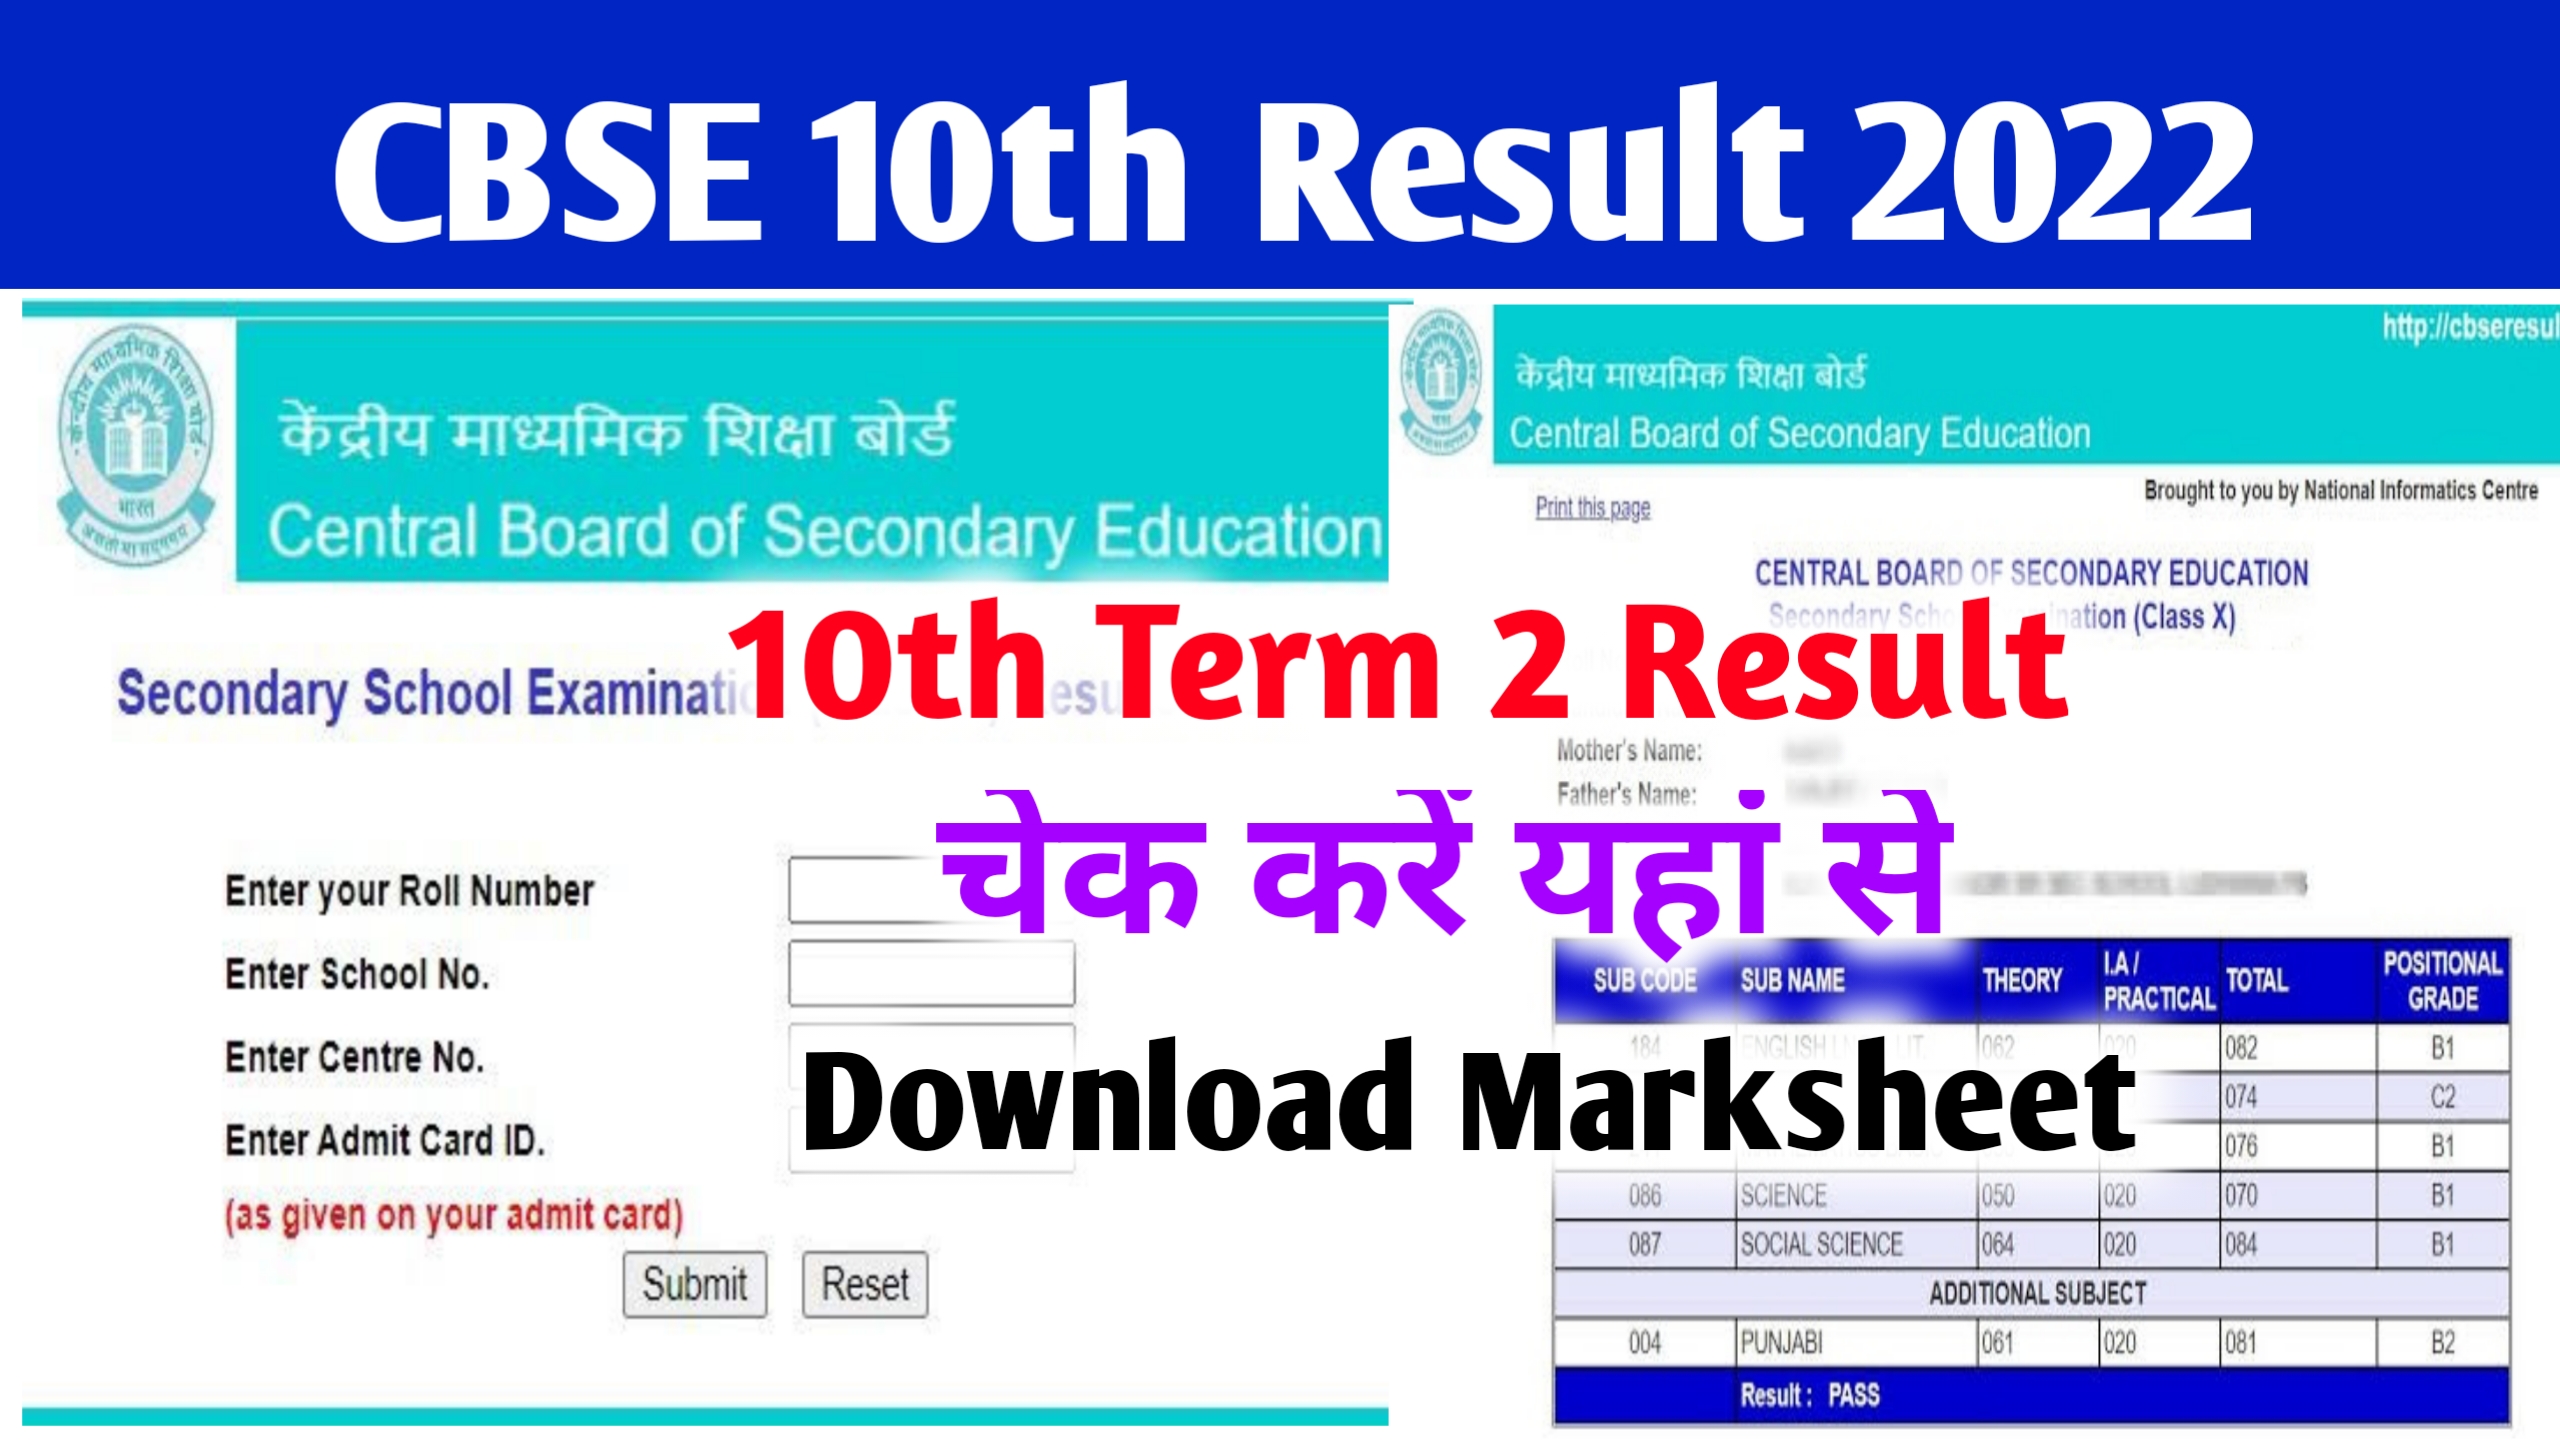 CBSE Class 10th Result 2022 ~ Direct Link & Marks @cbseresults.nic.in